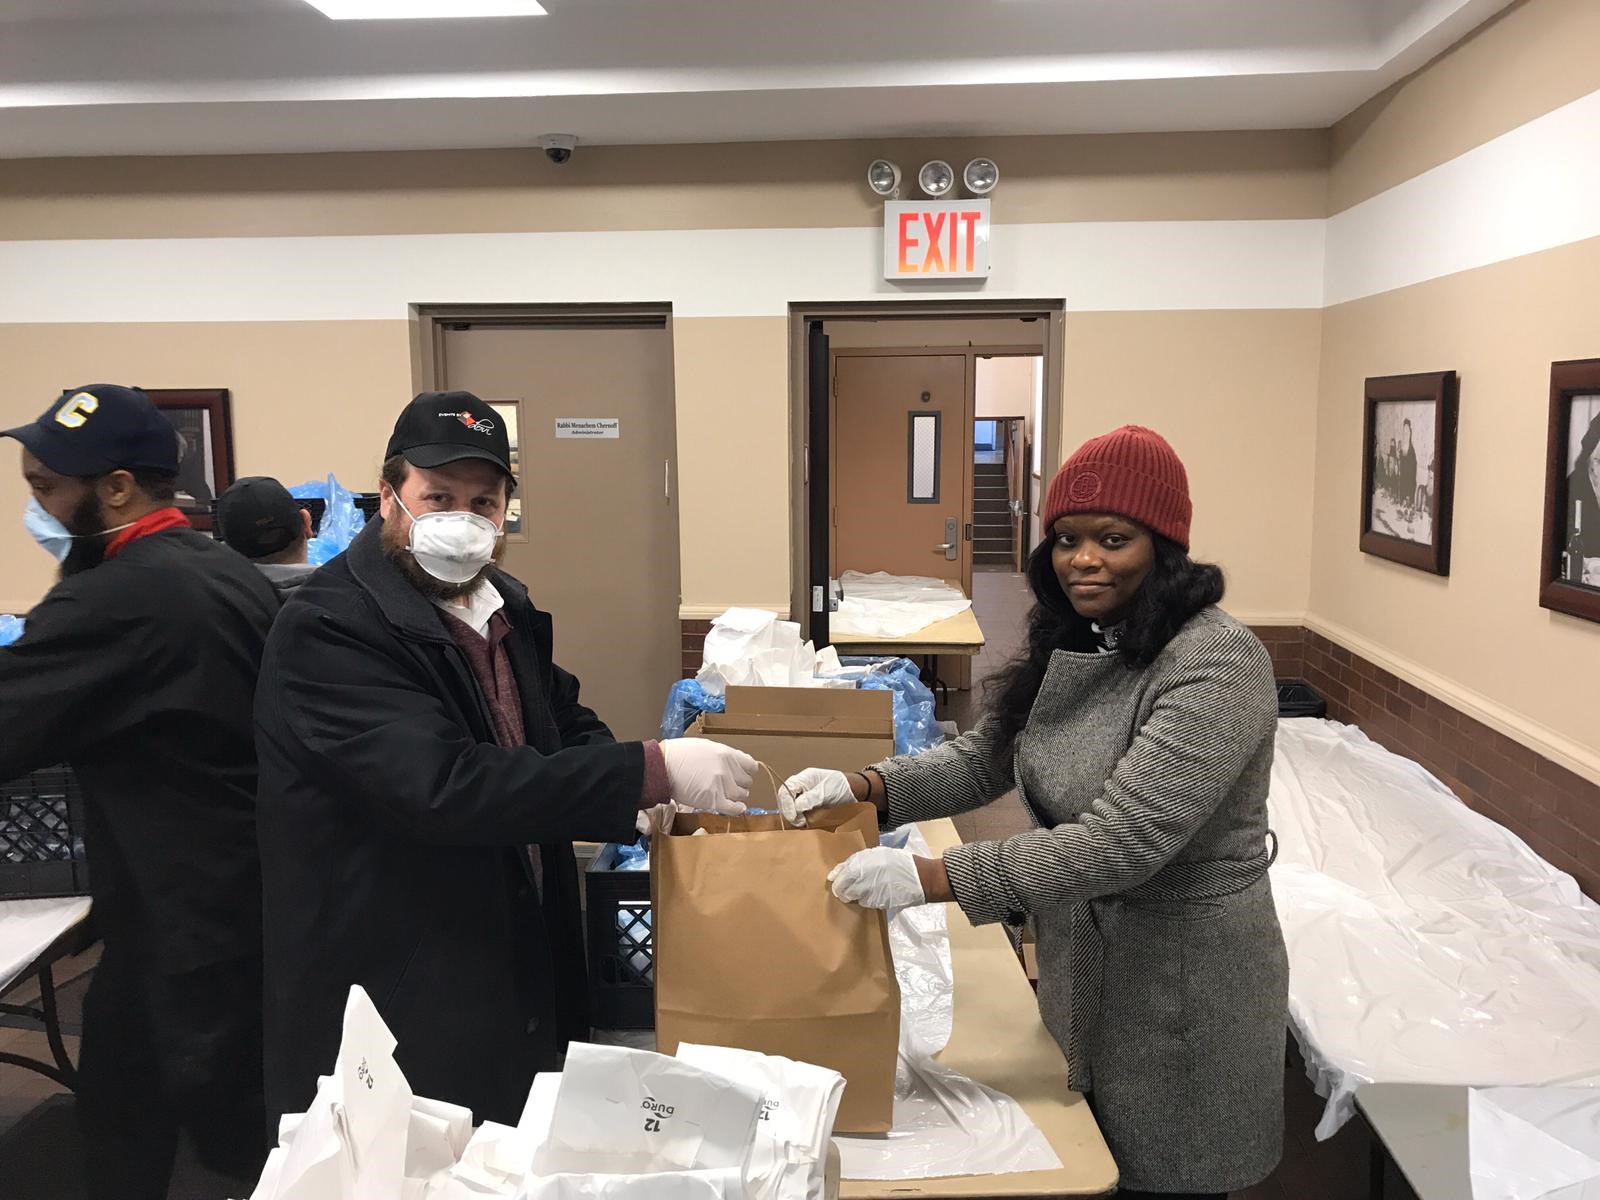 Assemblymember Bichotte with Dovi Zeitland Preparing grab and go bags for community members on March 26, 2020.